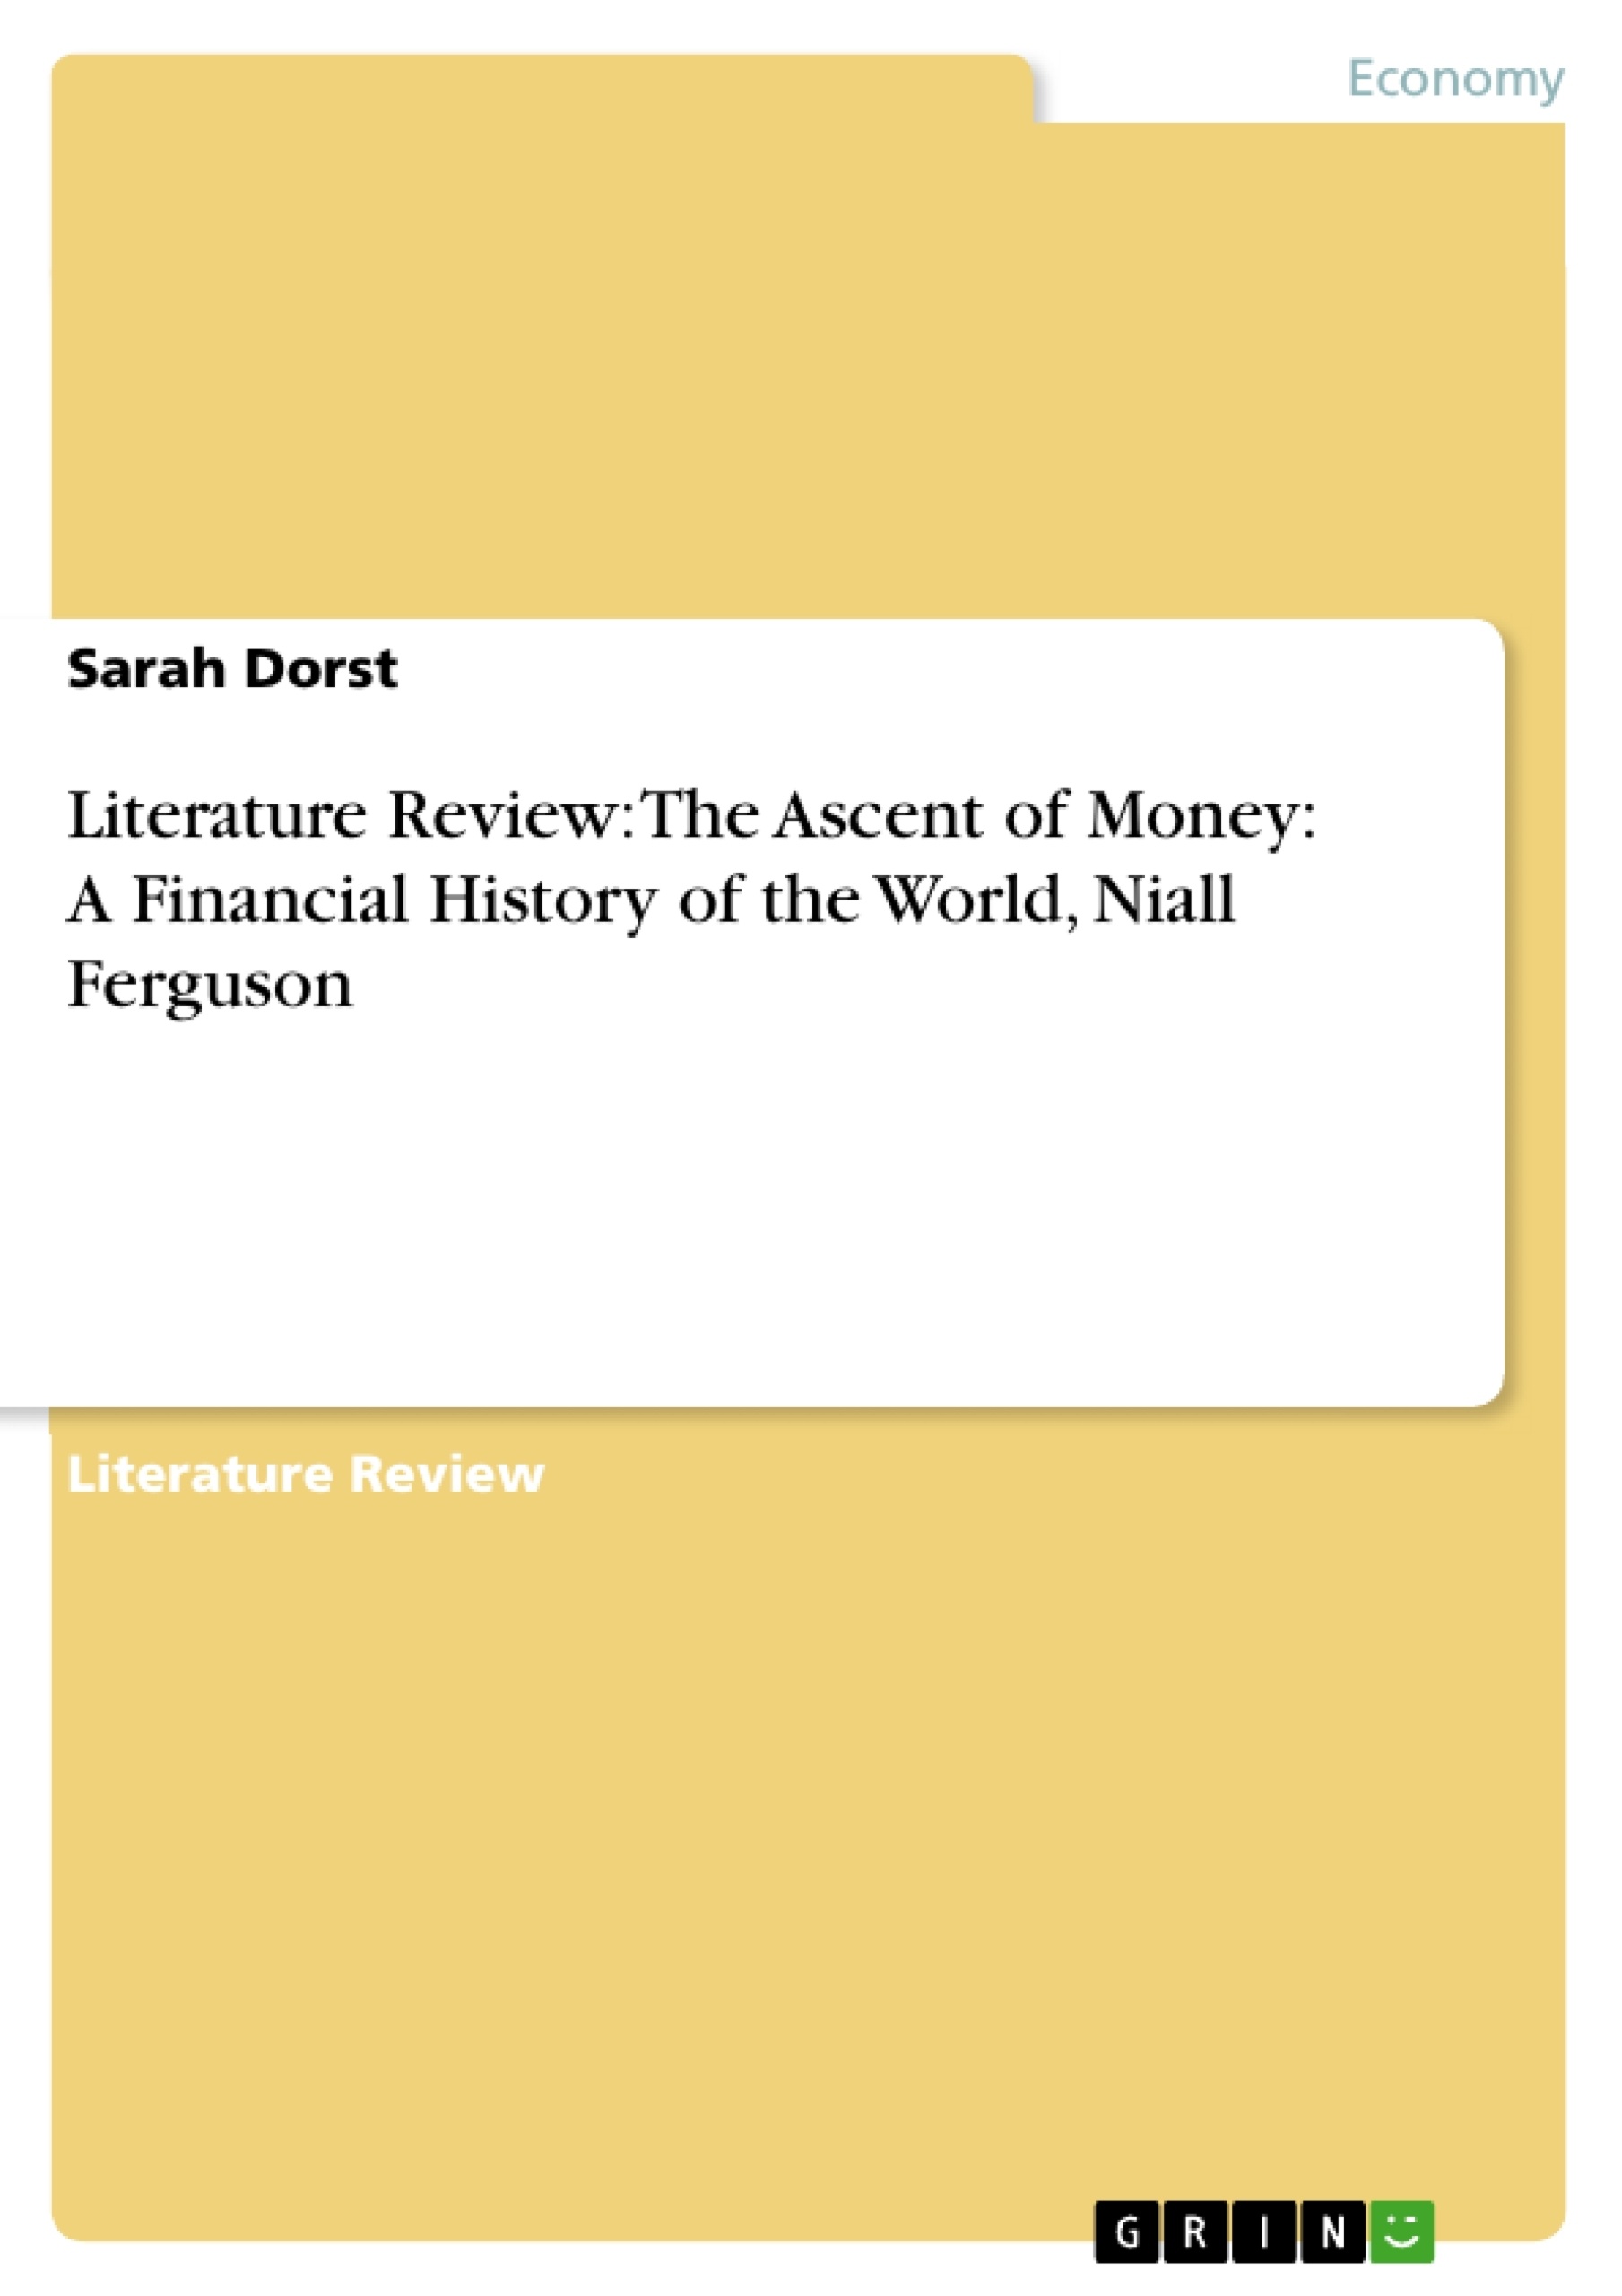 Título: Literature Review: The Ascent of Money: A Financial History of the World, Niall Ferguson